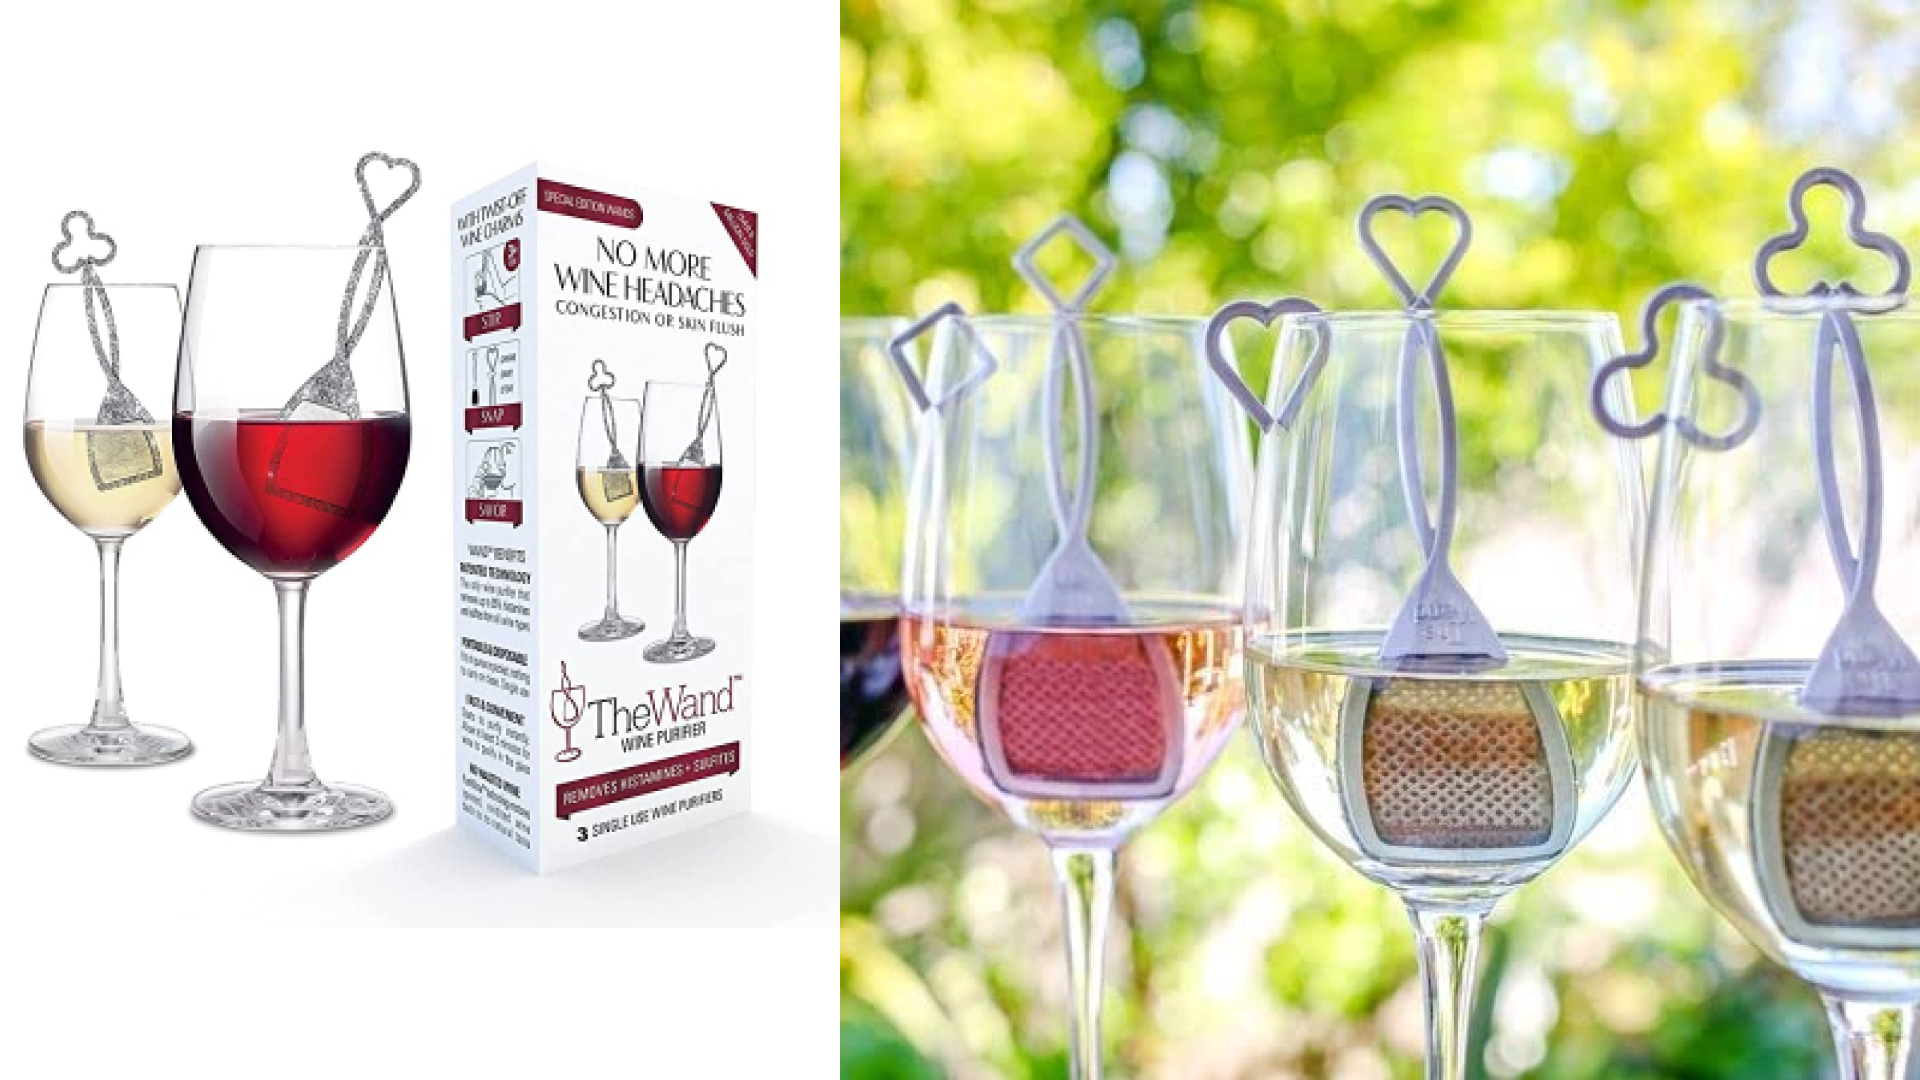 wine filter that may help reduce hangover symptoms